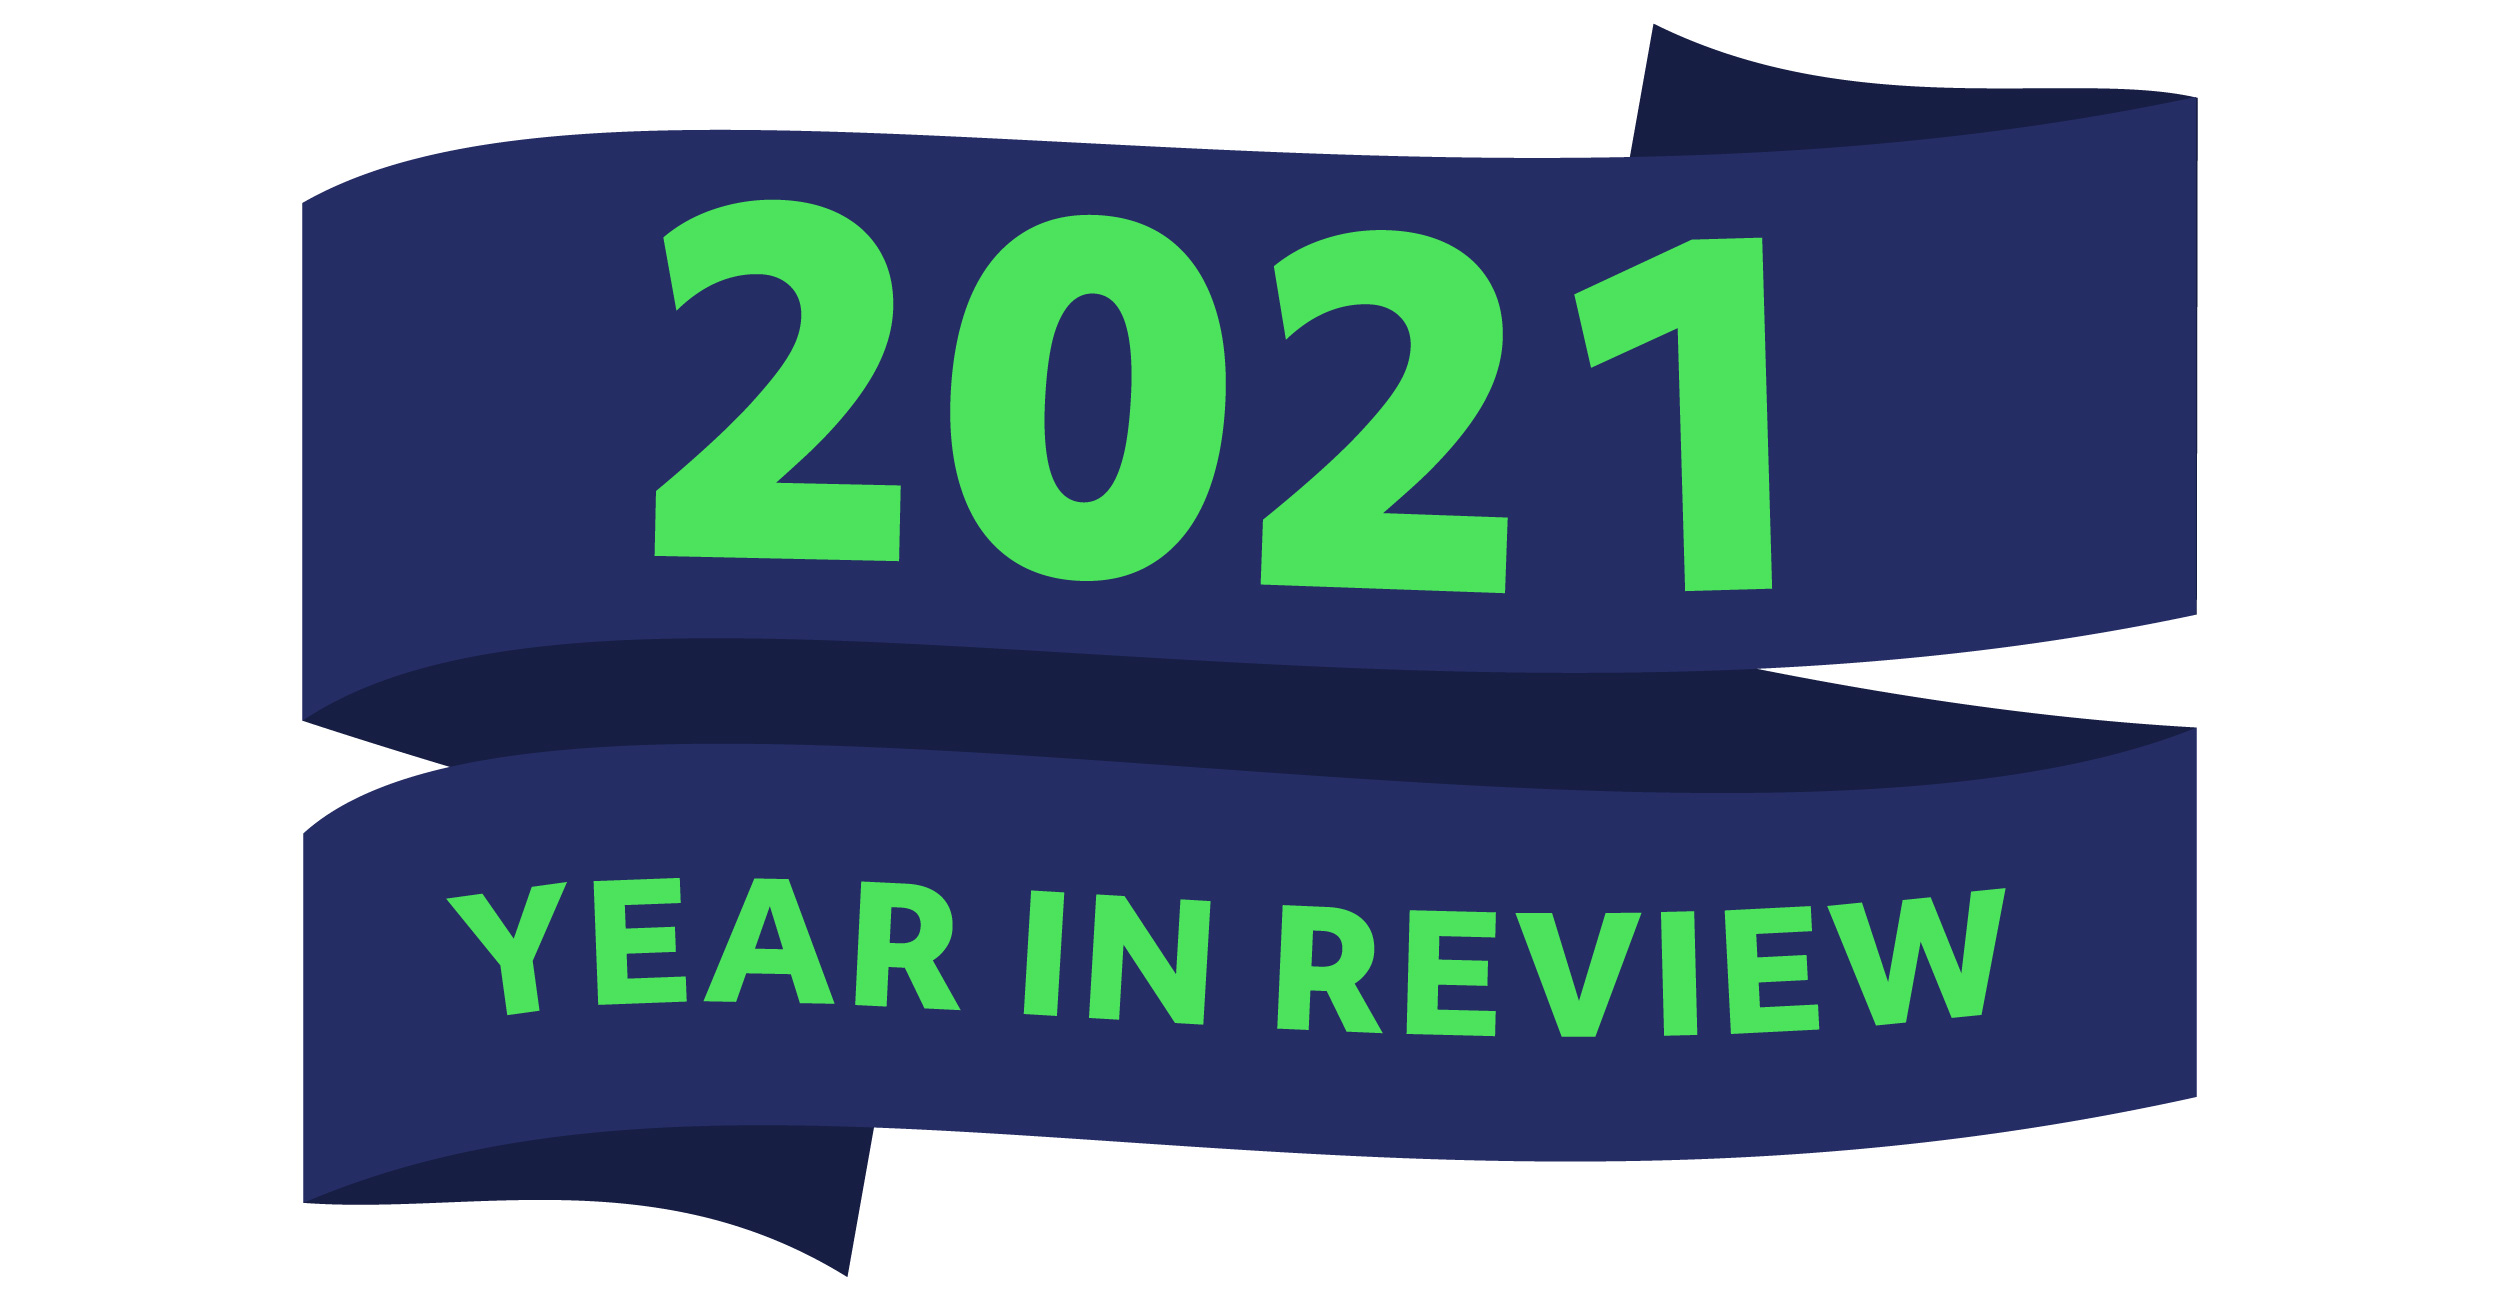 2021 Year in Review in ribbon banner style.